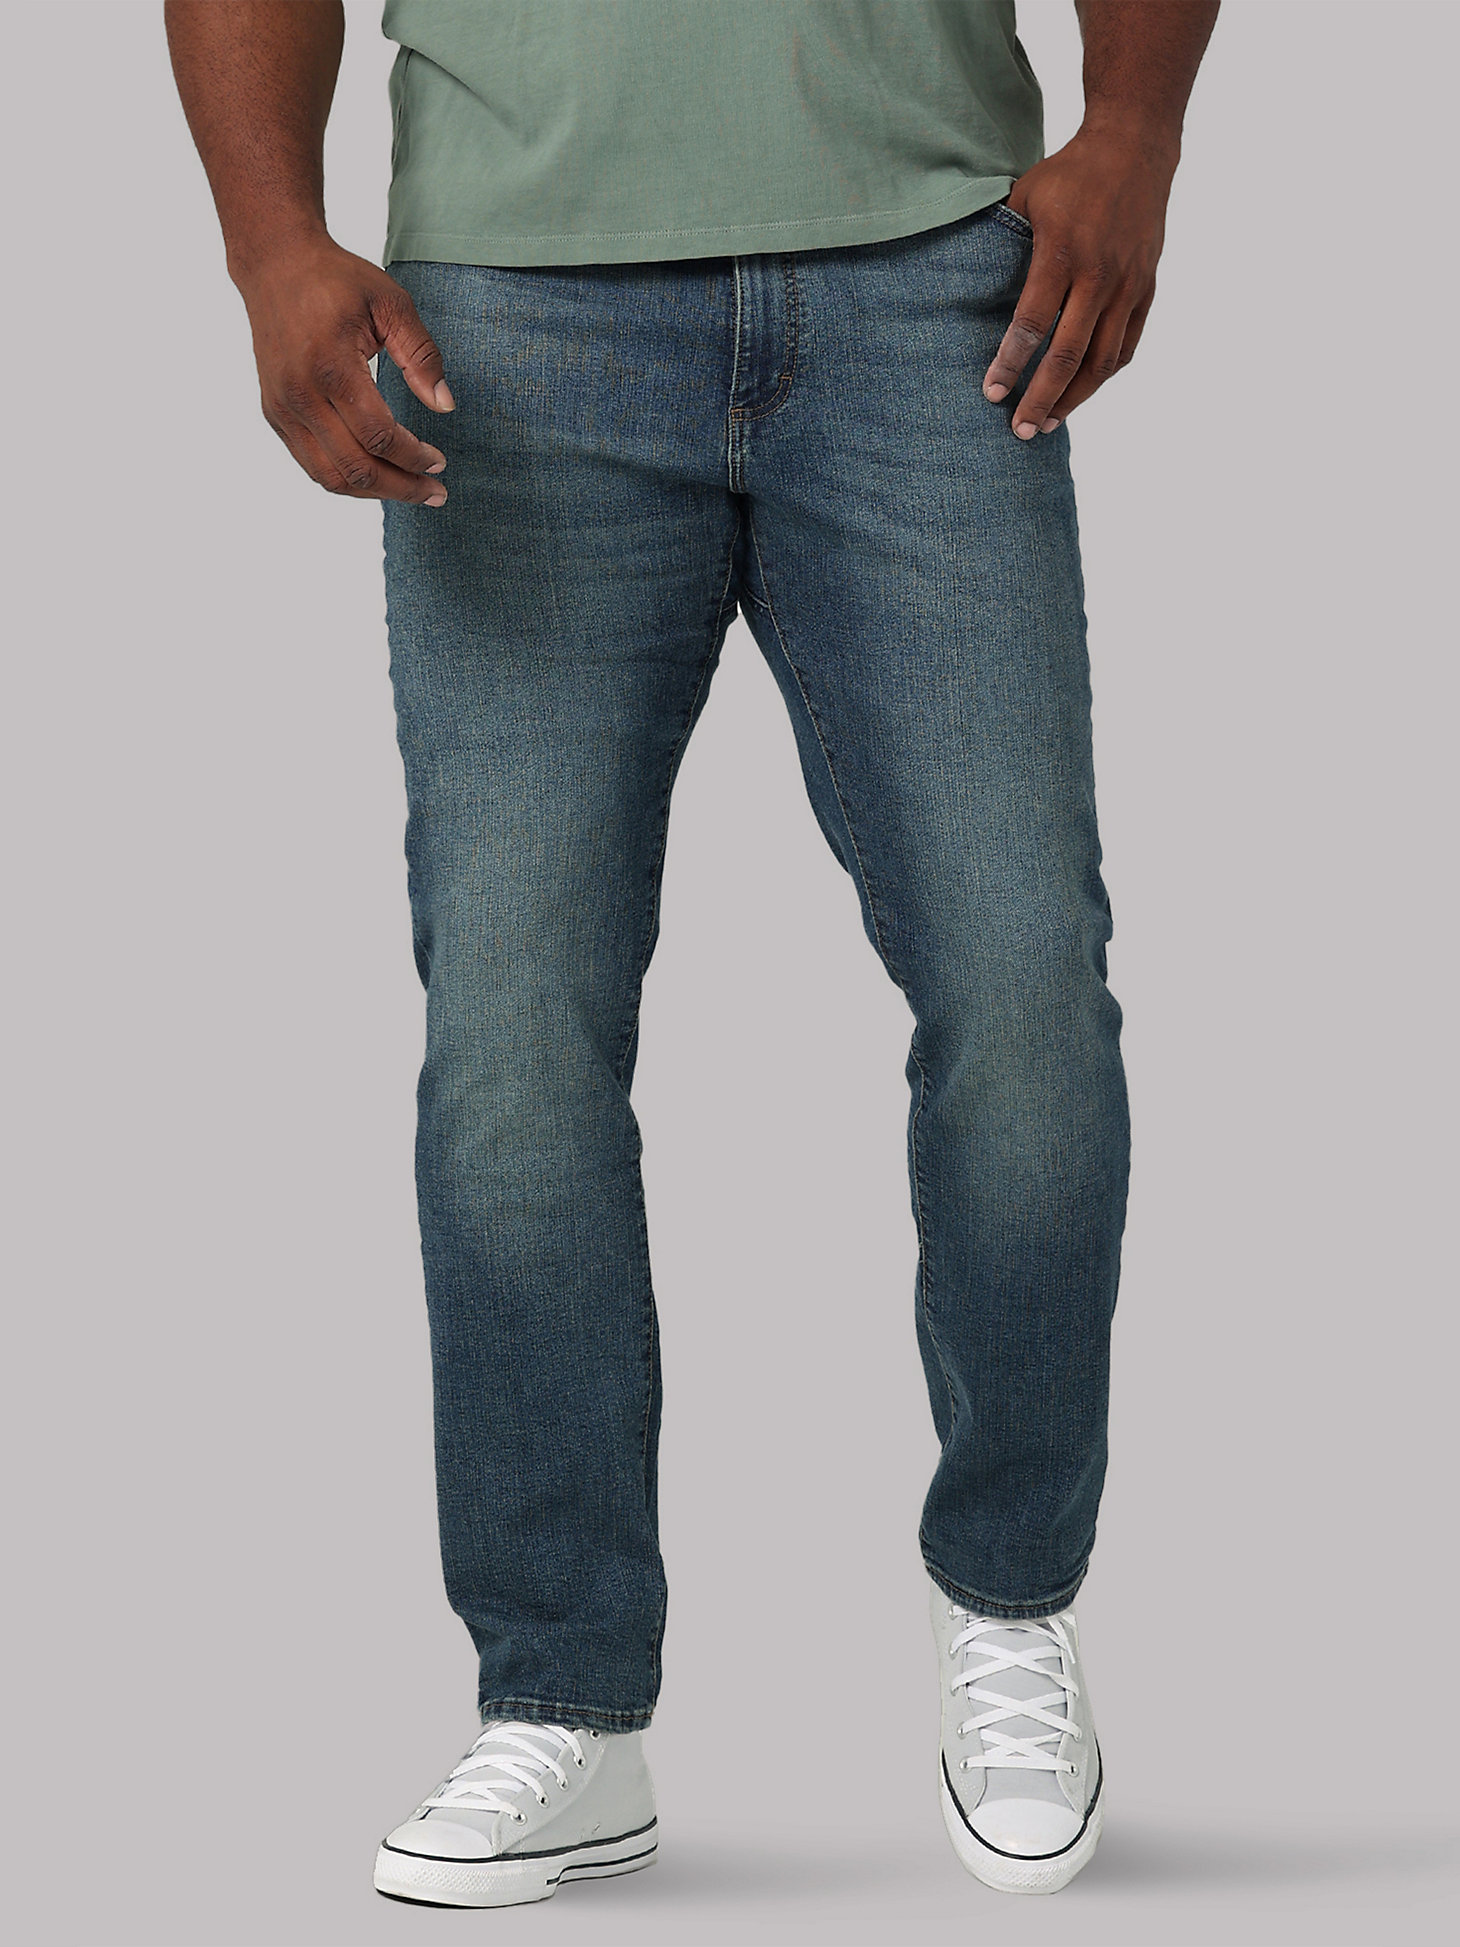 LEE Mens Big & Tall Modern Series Extreme Motion Straight Fit Jean 